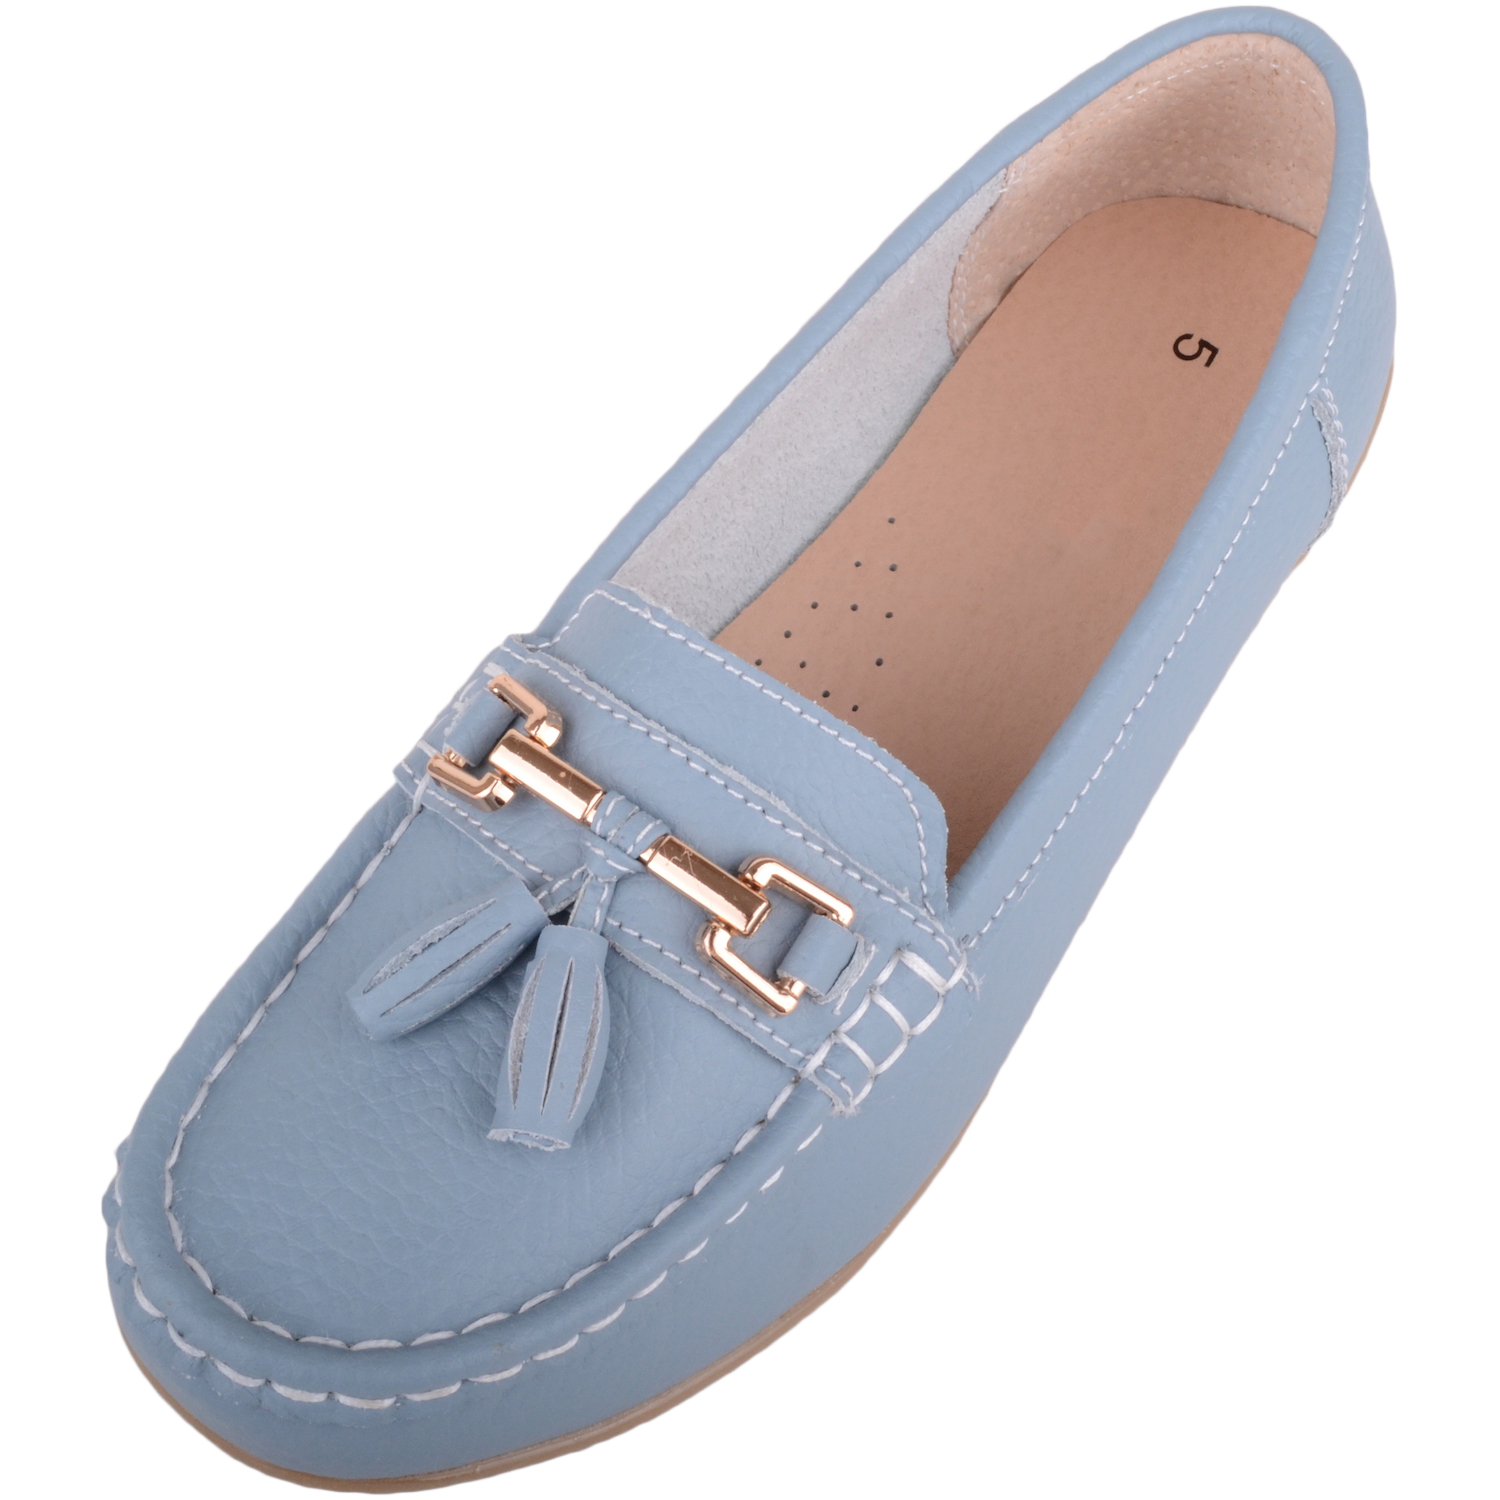 Ladies Slip On Casual Leather Loafer / Boat Shoes - Absolute Footwear